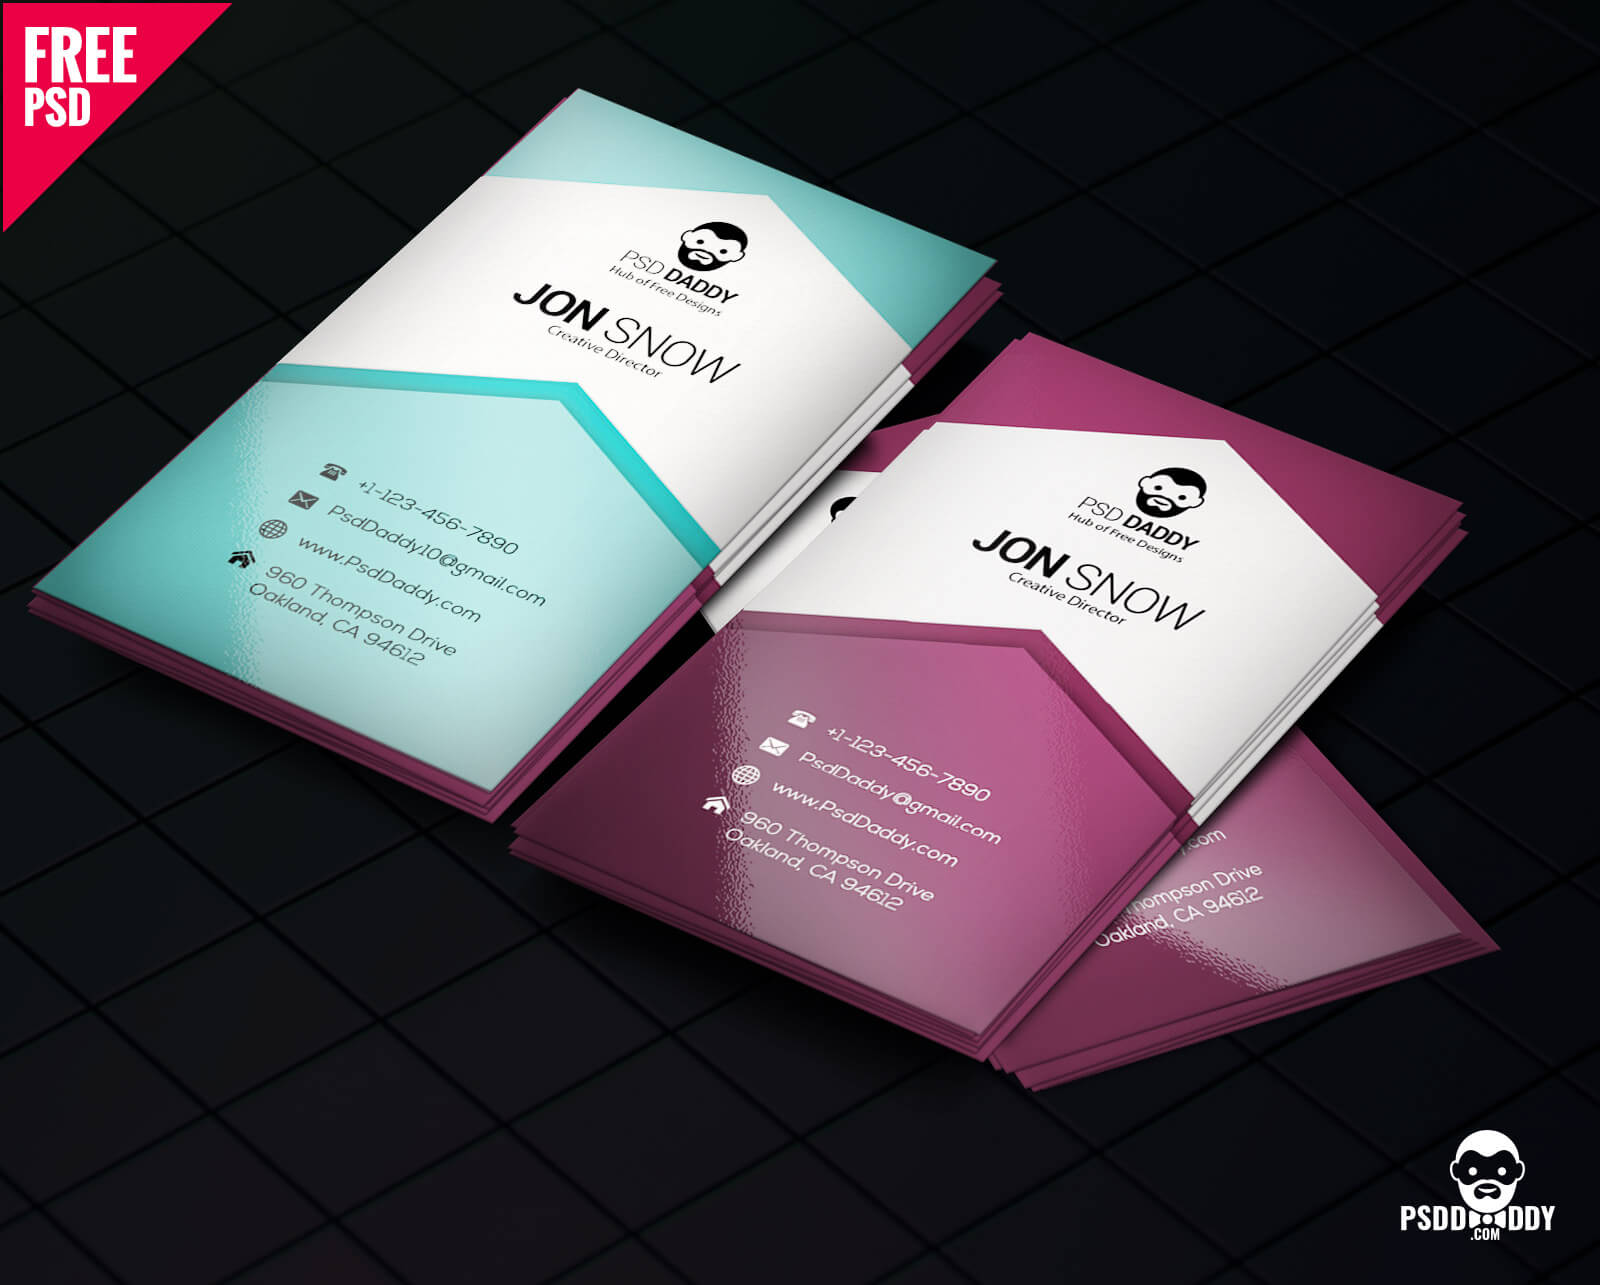 Download]Creative Business Card Psd Free | Psddaddy Throughout Creative Business Card Templates Psd